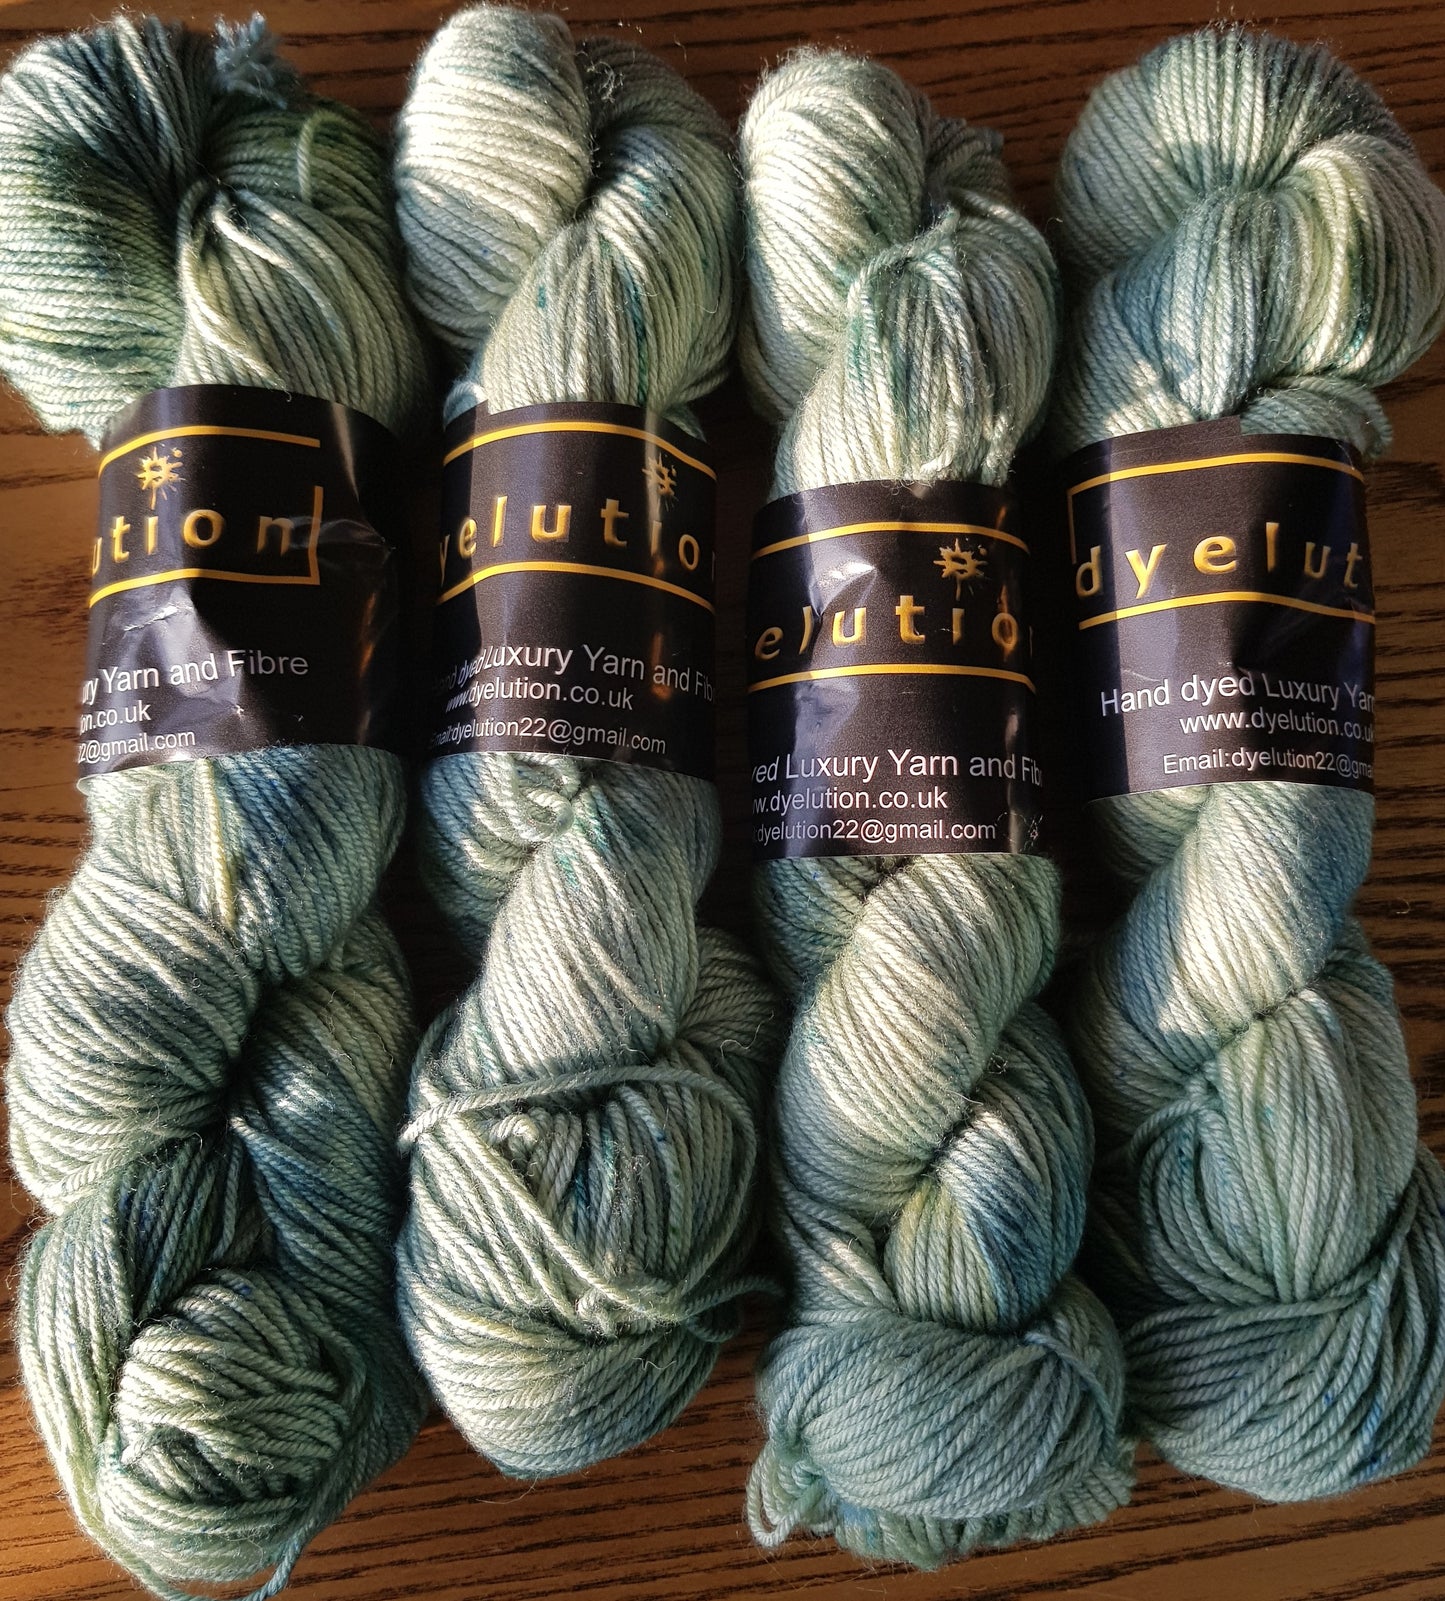 100G Bluefaced Leicester and silk hand dyed DK Weight Yarn- "Pounamu Jade"